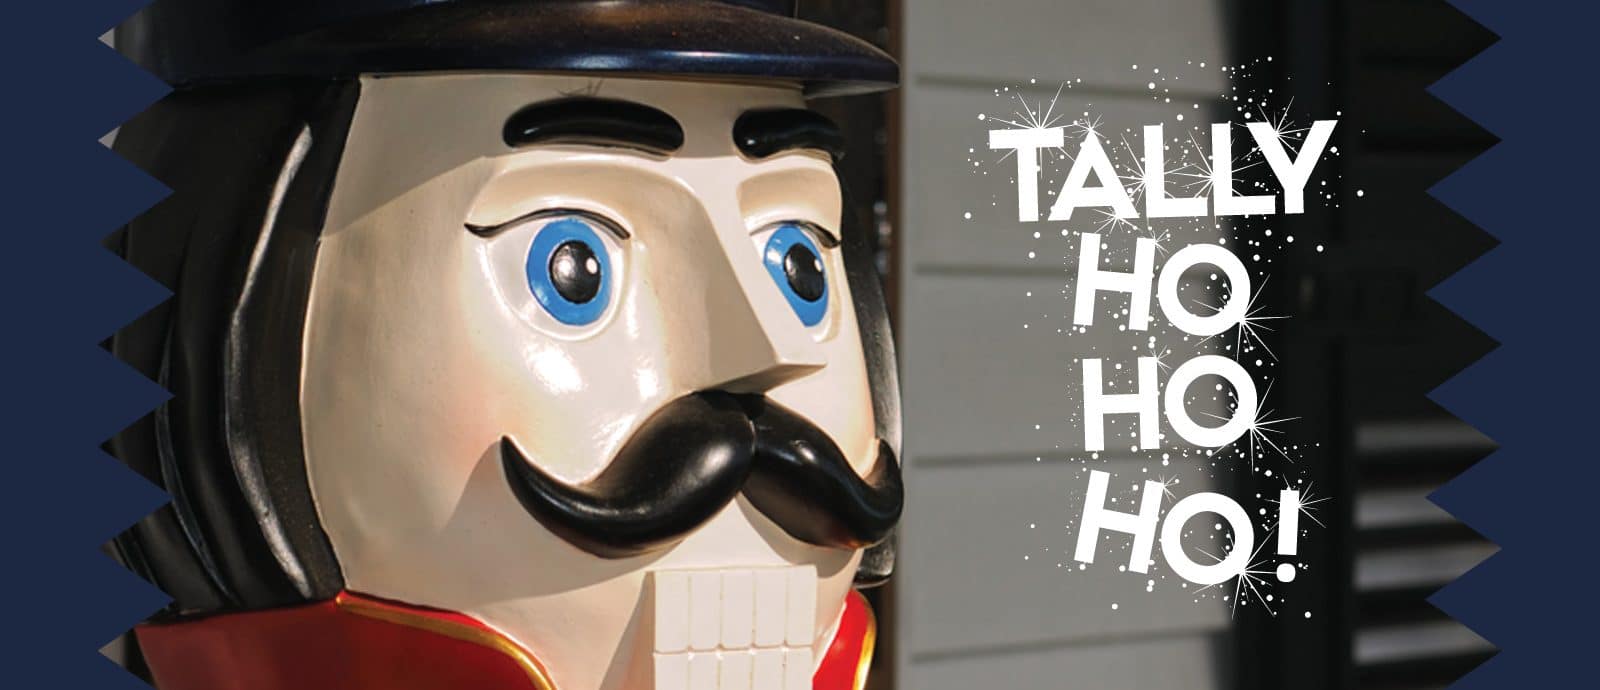 A close-up photo of the head of a nutcracker with text next to it saying 'tally ho ho ho!'